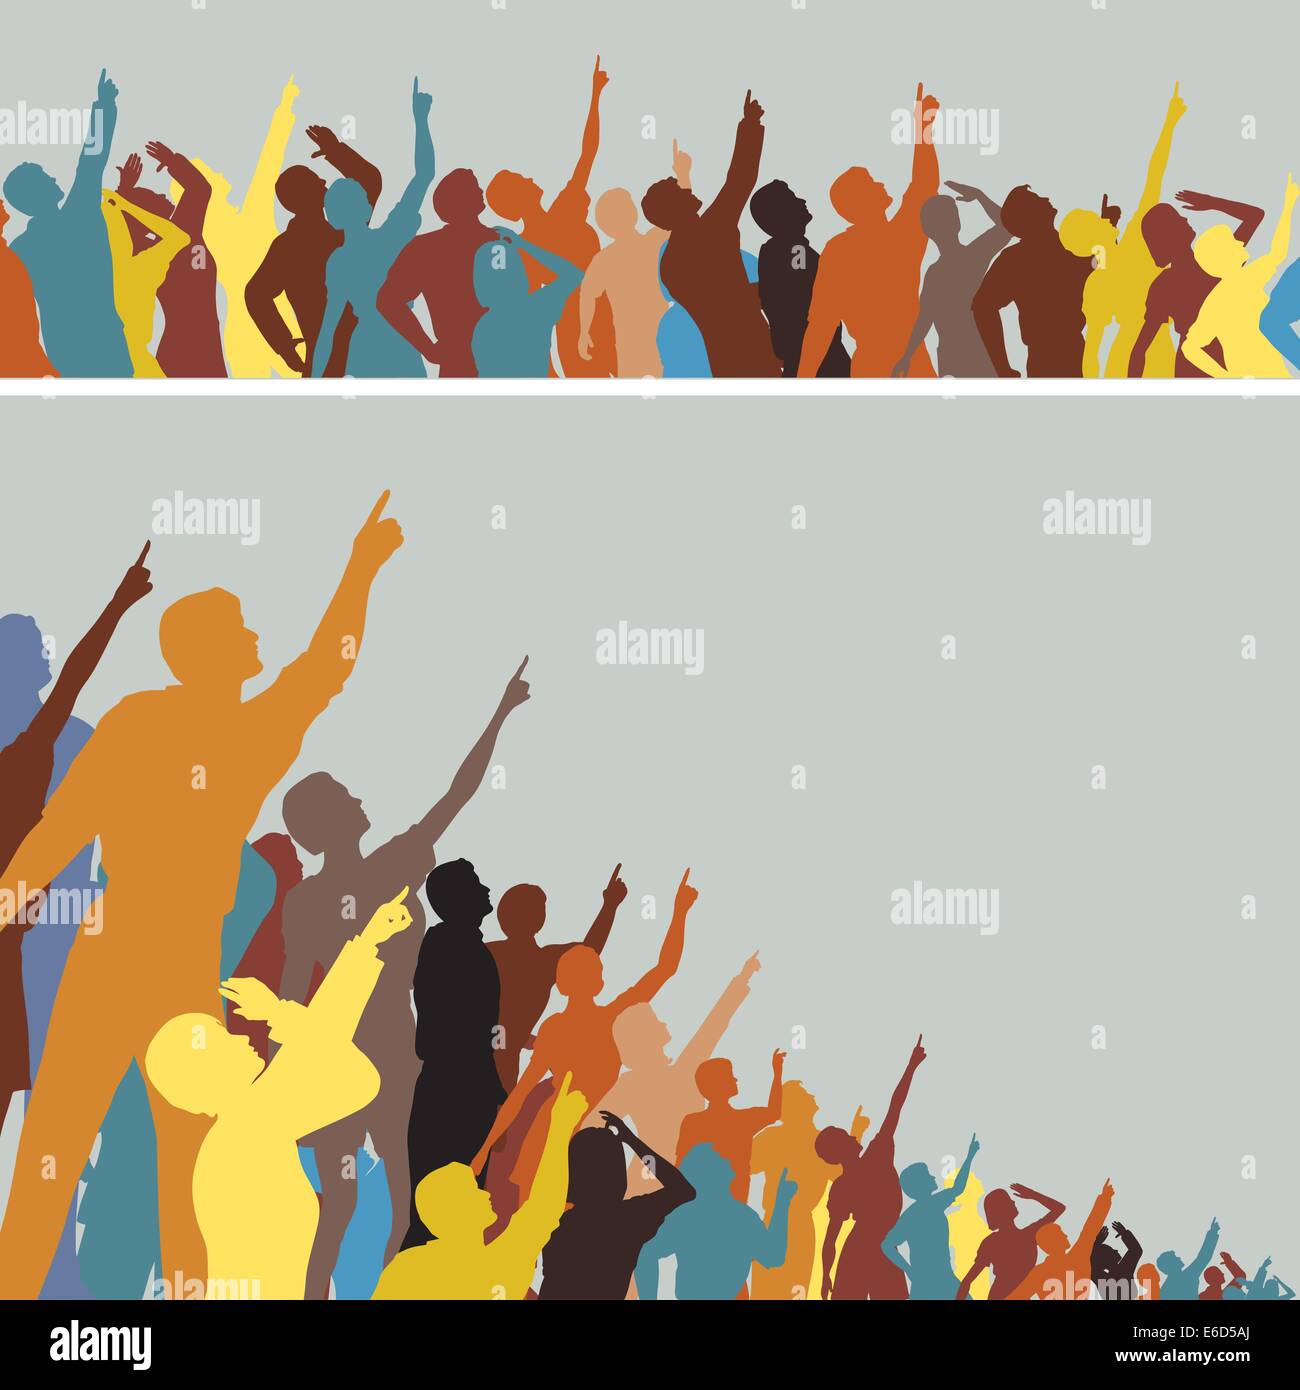 Two colorful editable vector silhouettes of crowds pointing and looking upwards Stock Vector